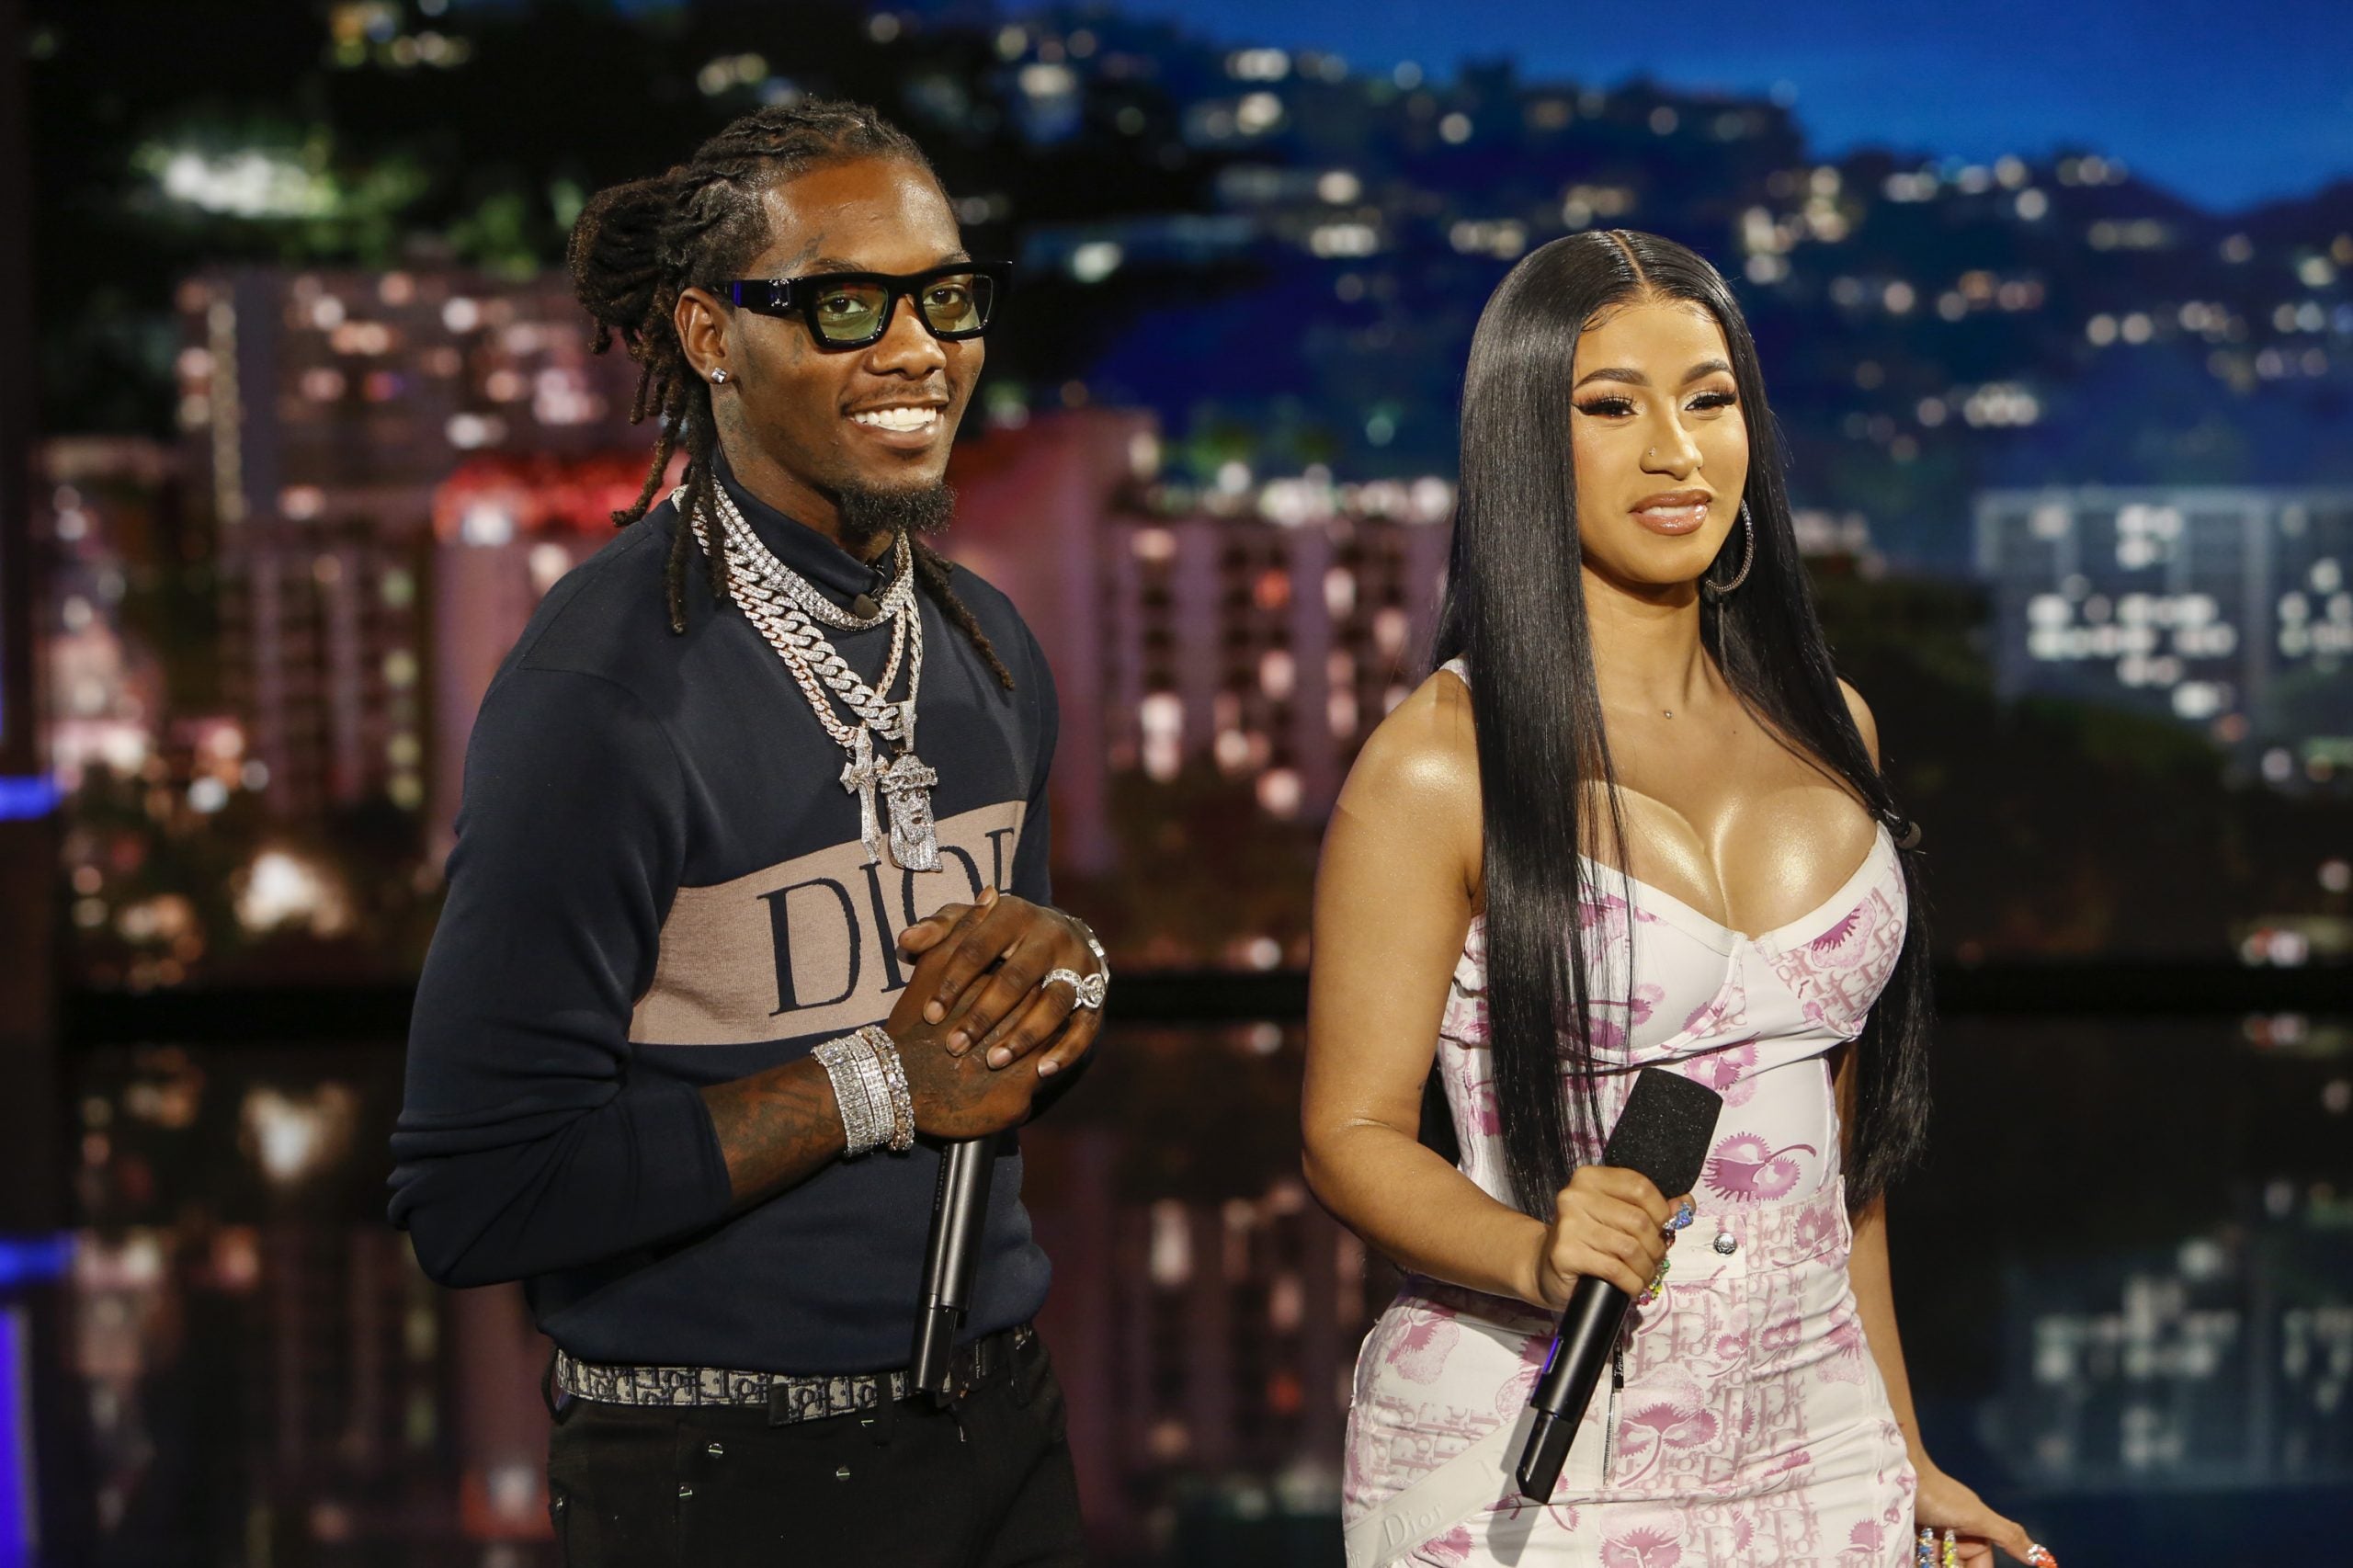 Cardi B Defends Her Relationship With Offset: 'It's Always Us Against The World'